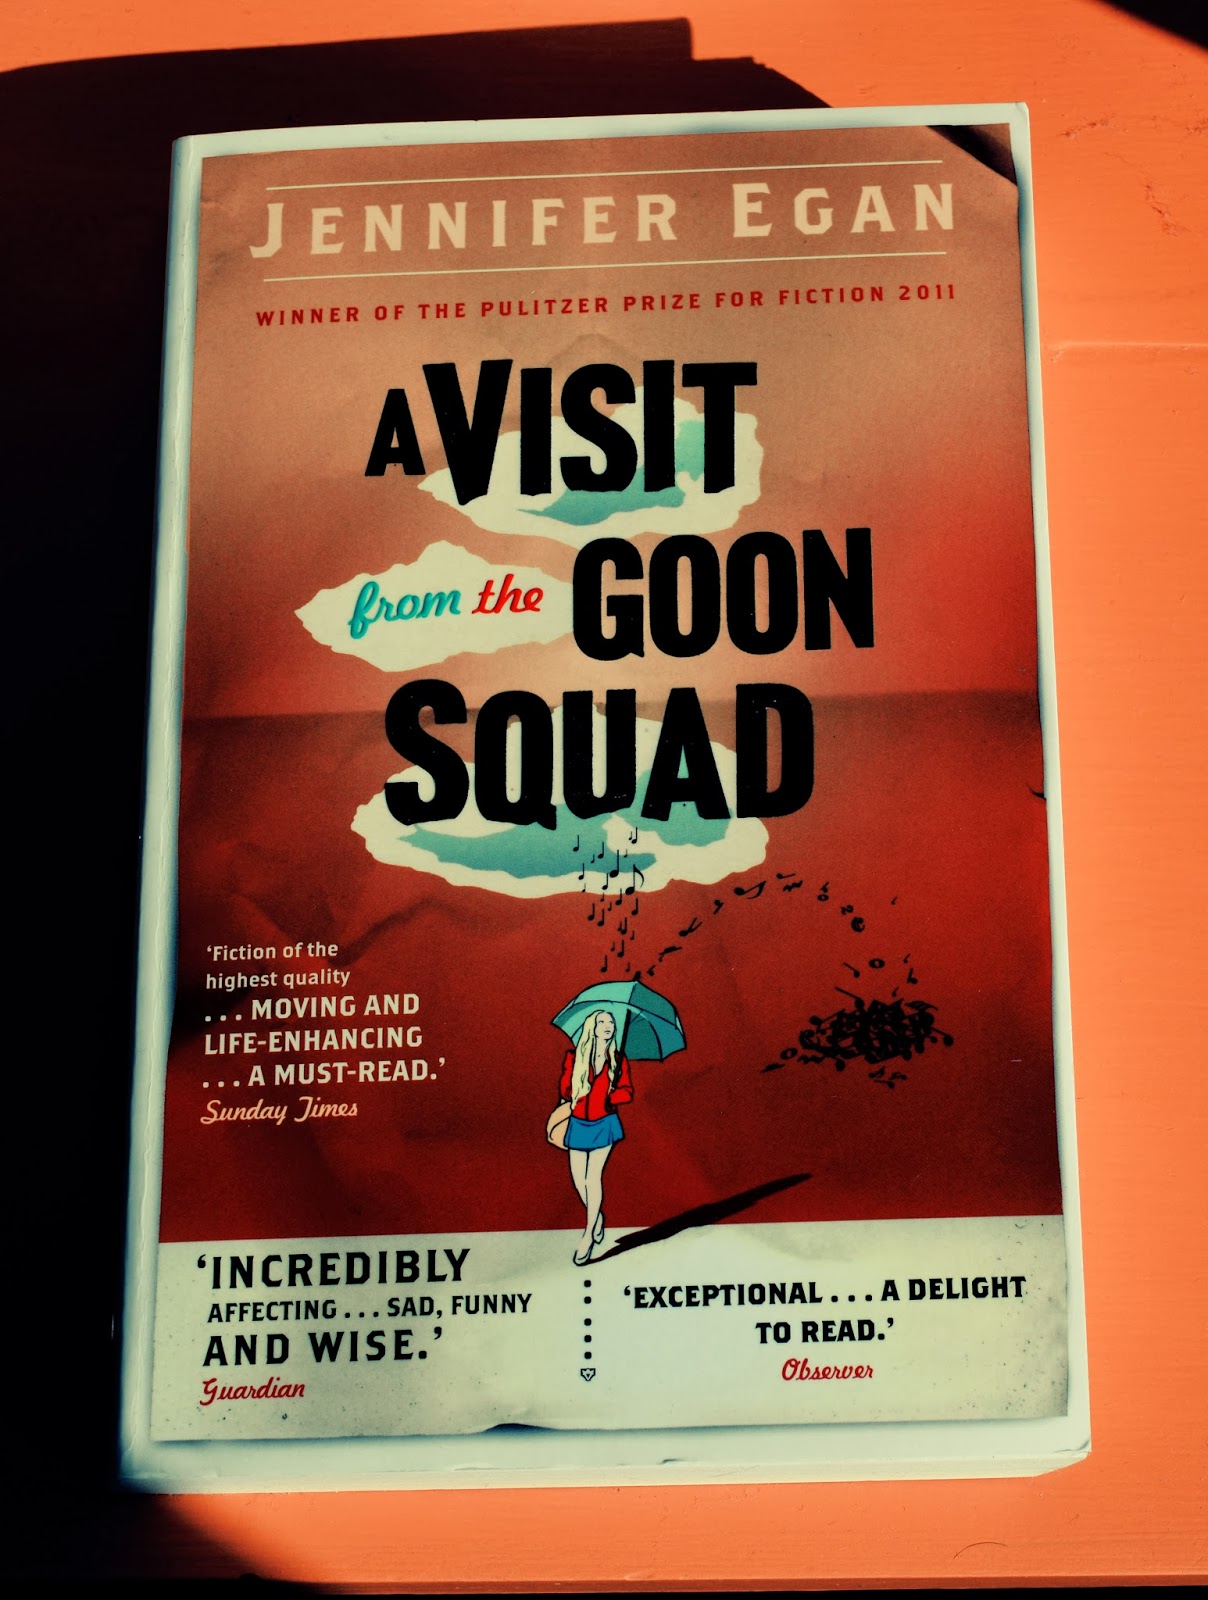 Book&aCuppa: Jennifer Egan, A Visit from the Goon Squad